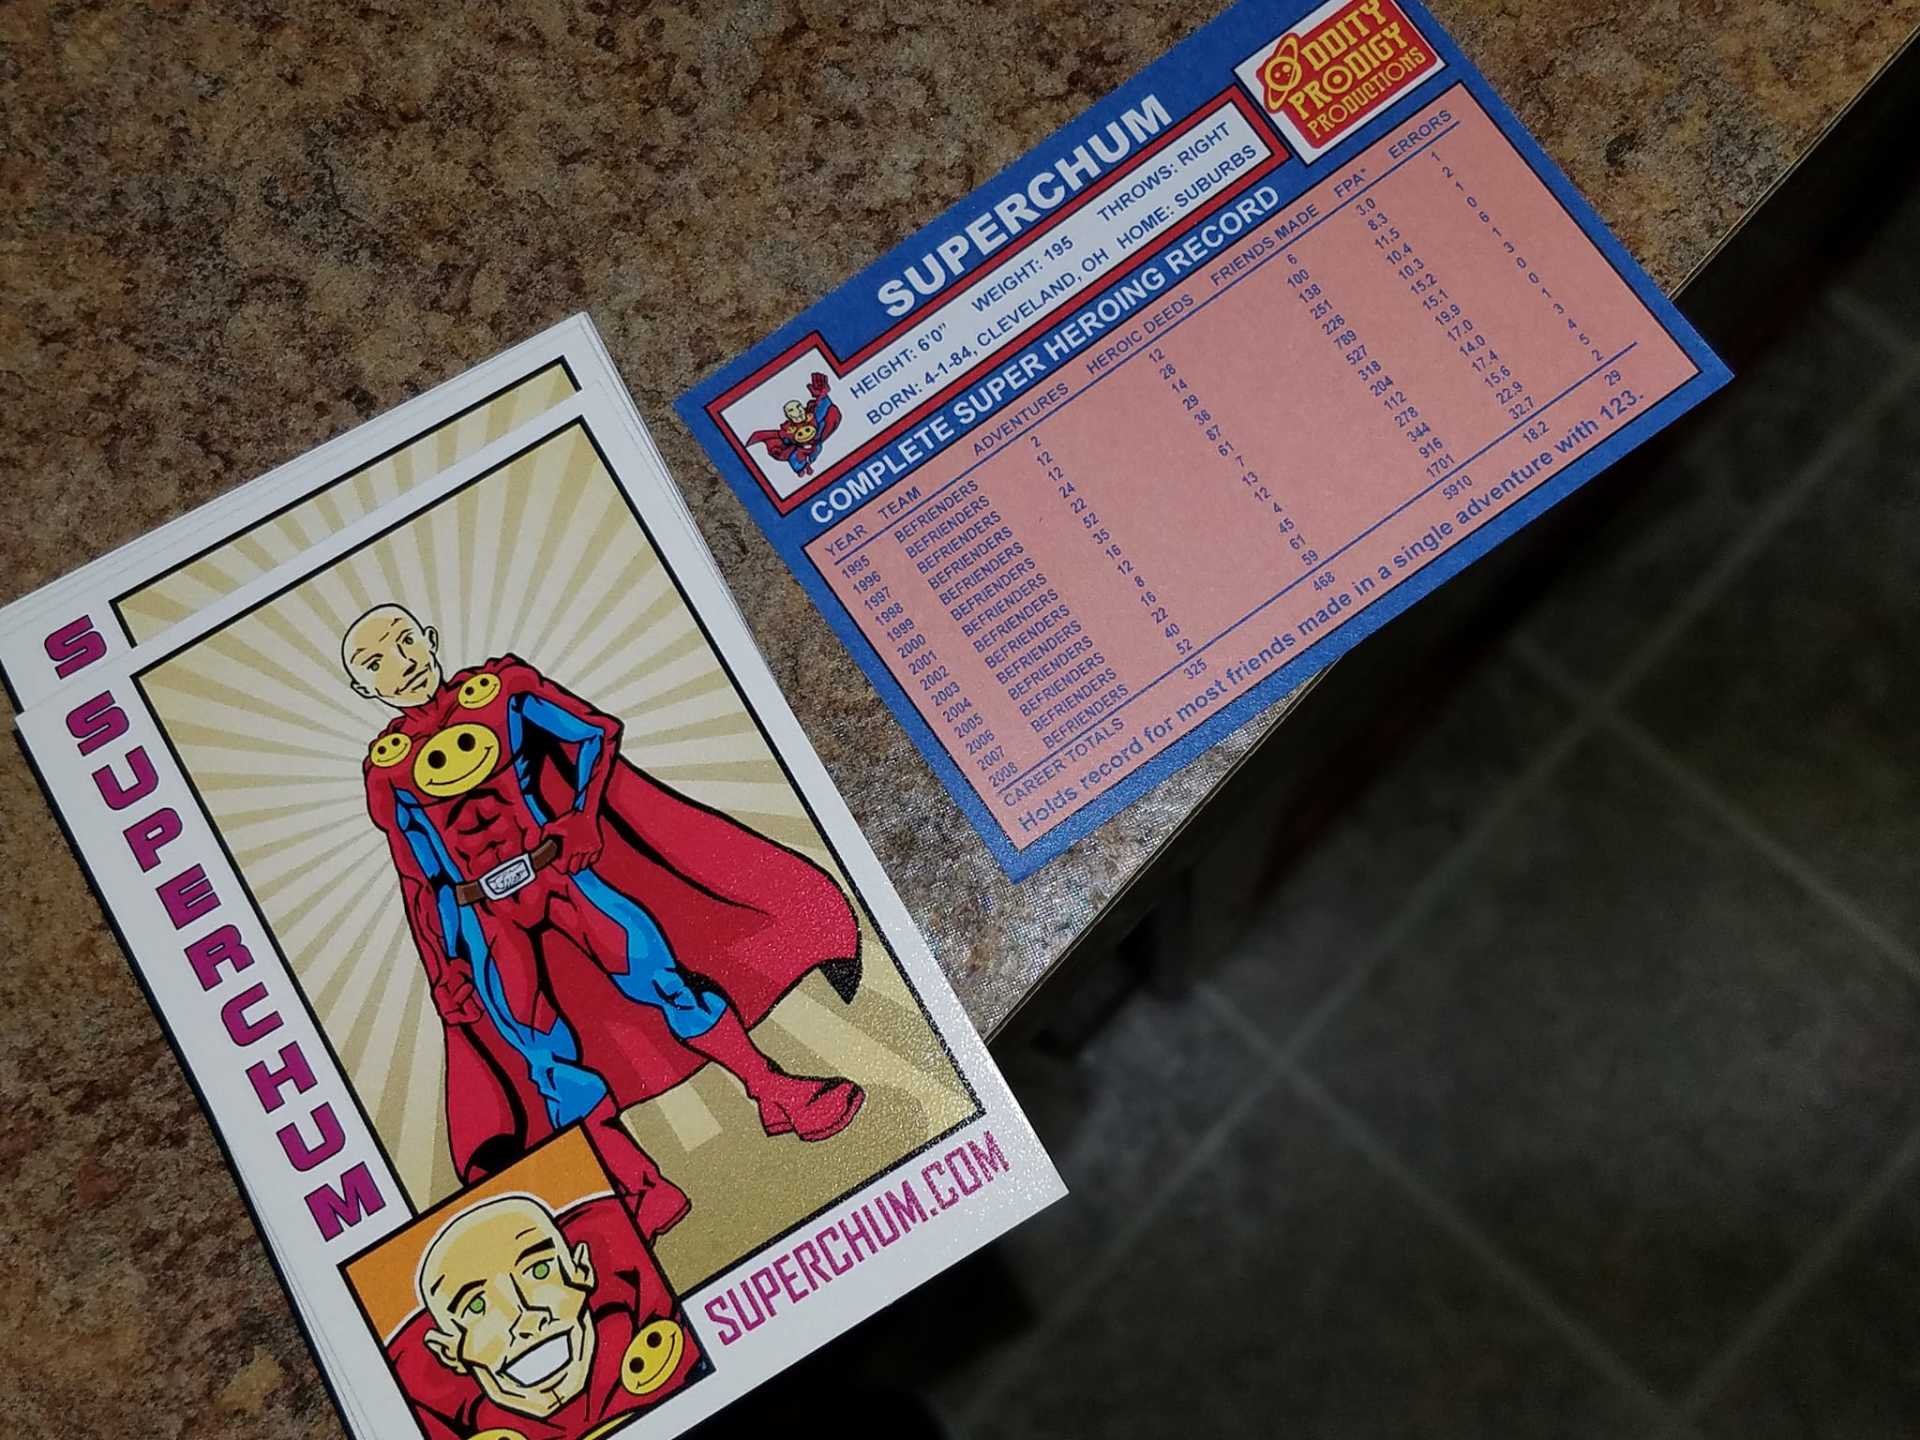 Superchum's new trading card has arrived